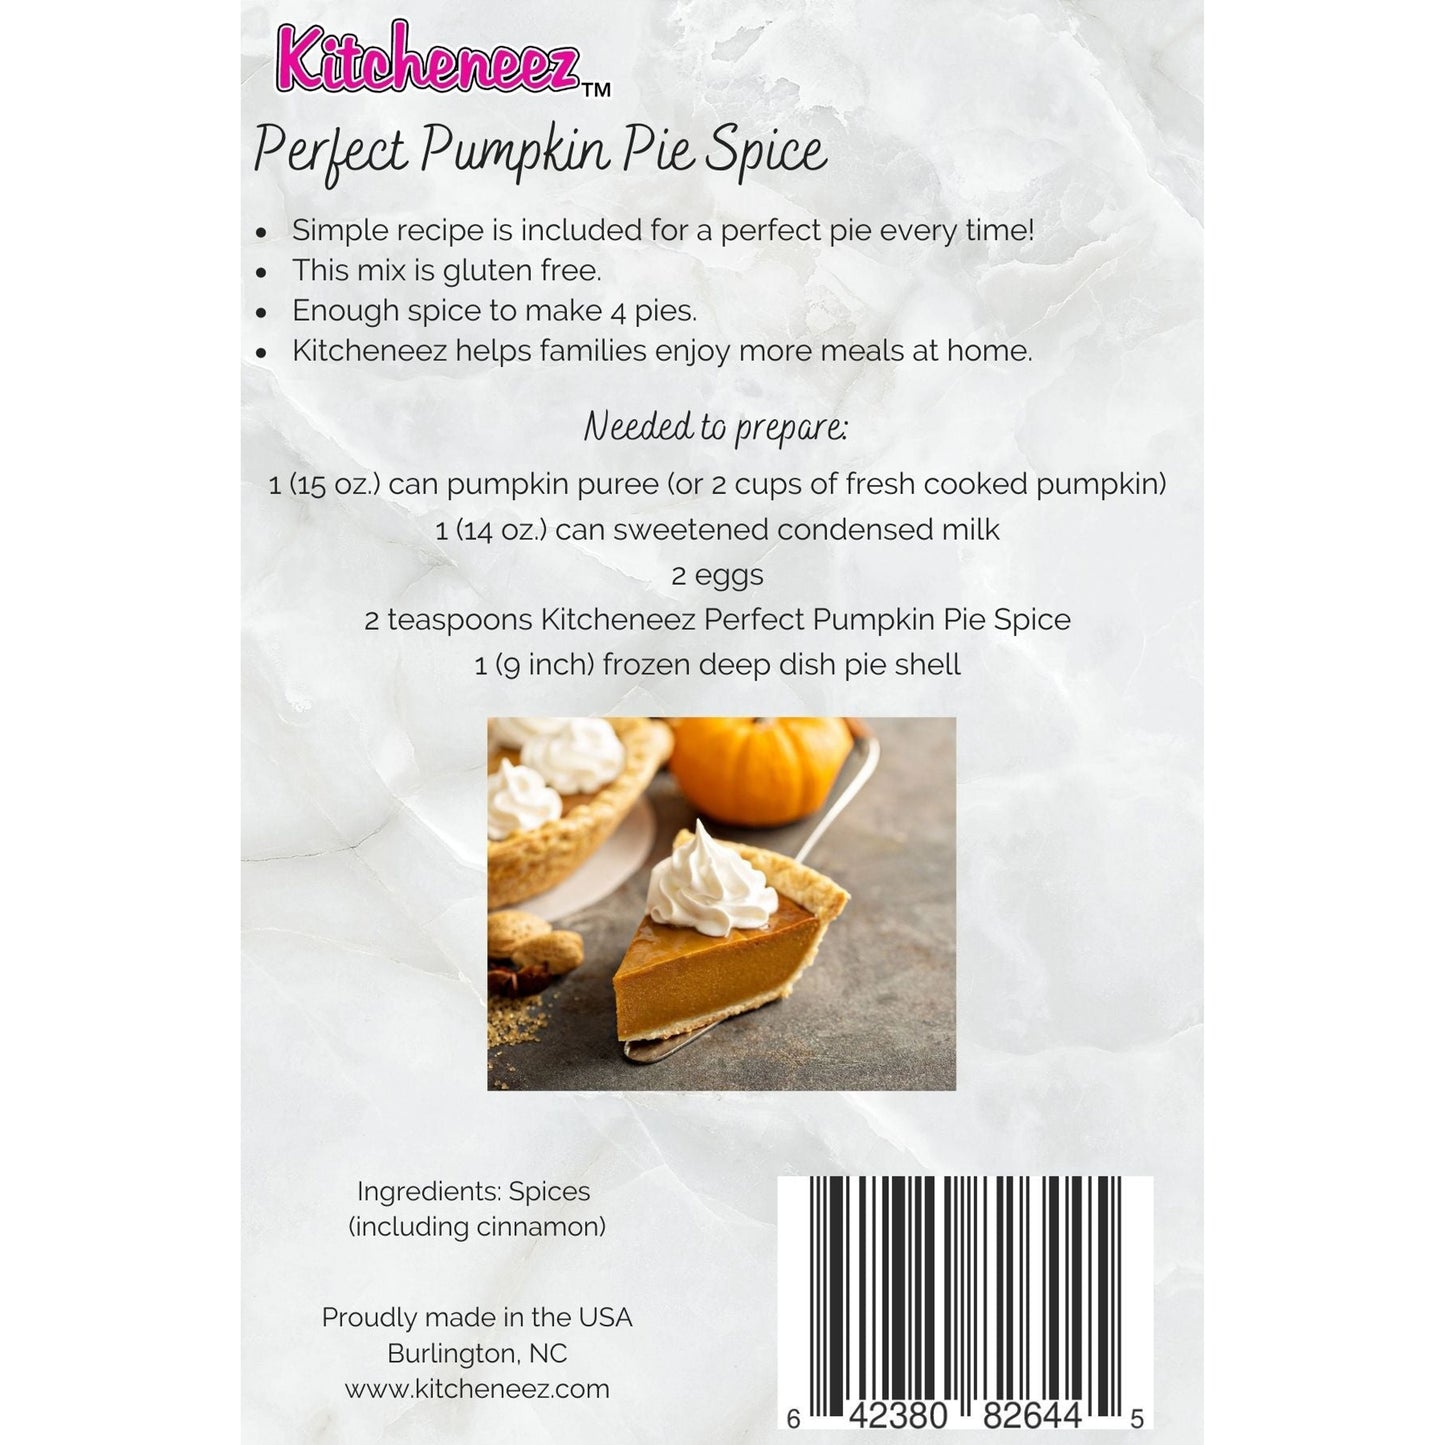 PRE-ORDER pumpkin Pie Spice with the recipe for Perfect Pumpkin Pie - Kitcheneez Mixes & More!